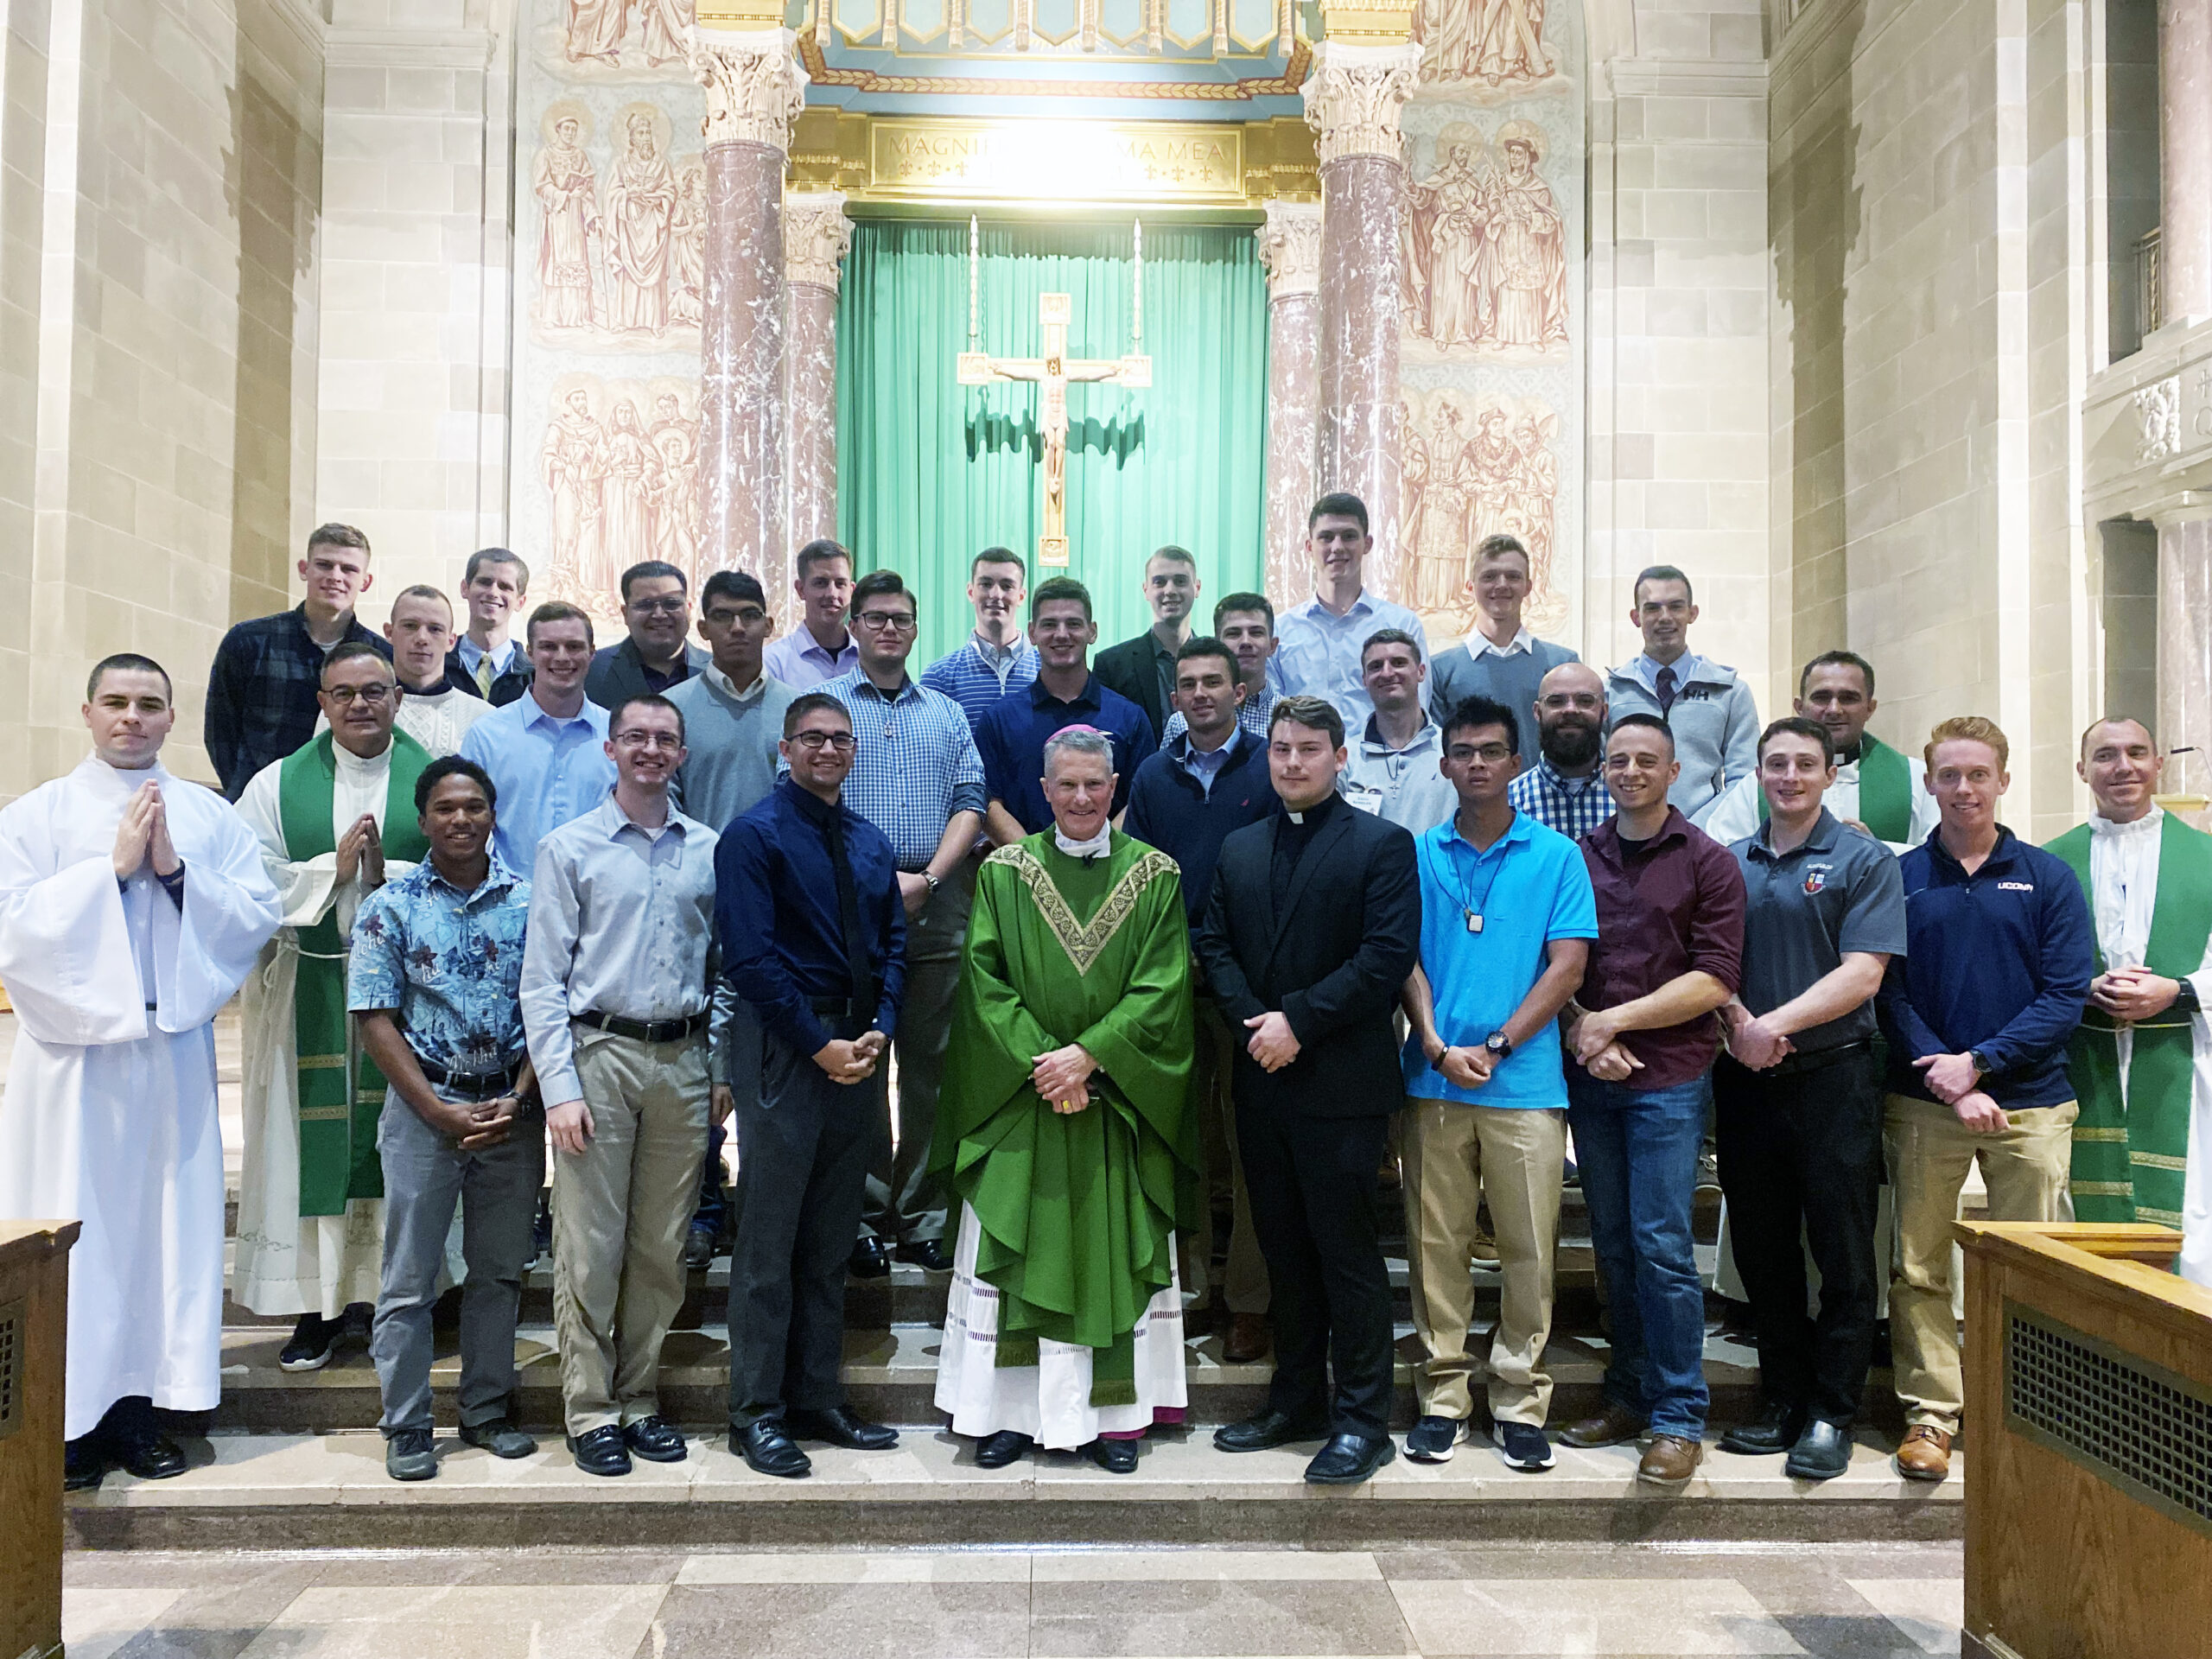 Image of Archbishop Broglio with discerning men at the Discernment Retreat in September 2022.